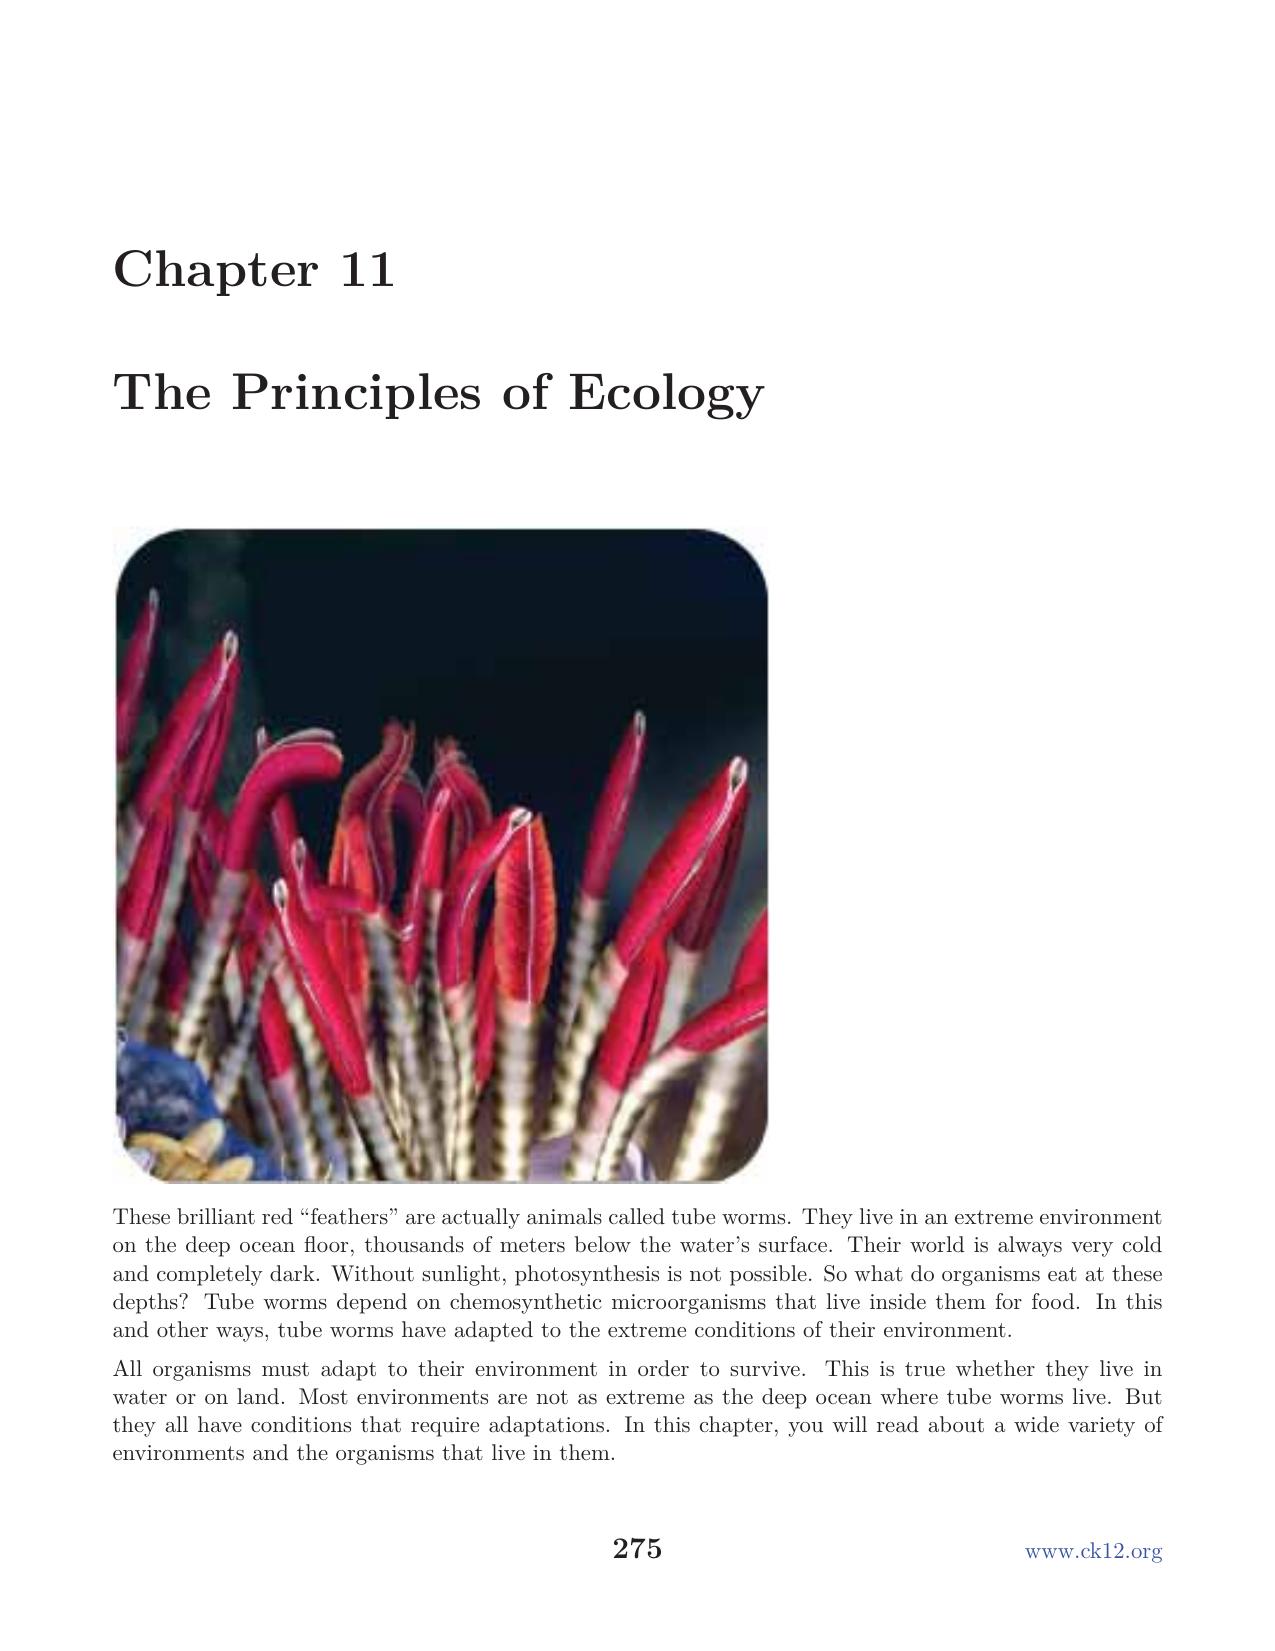 Biology Chapter11